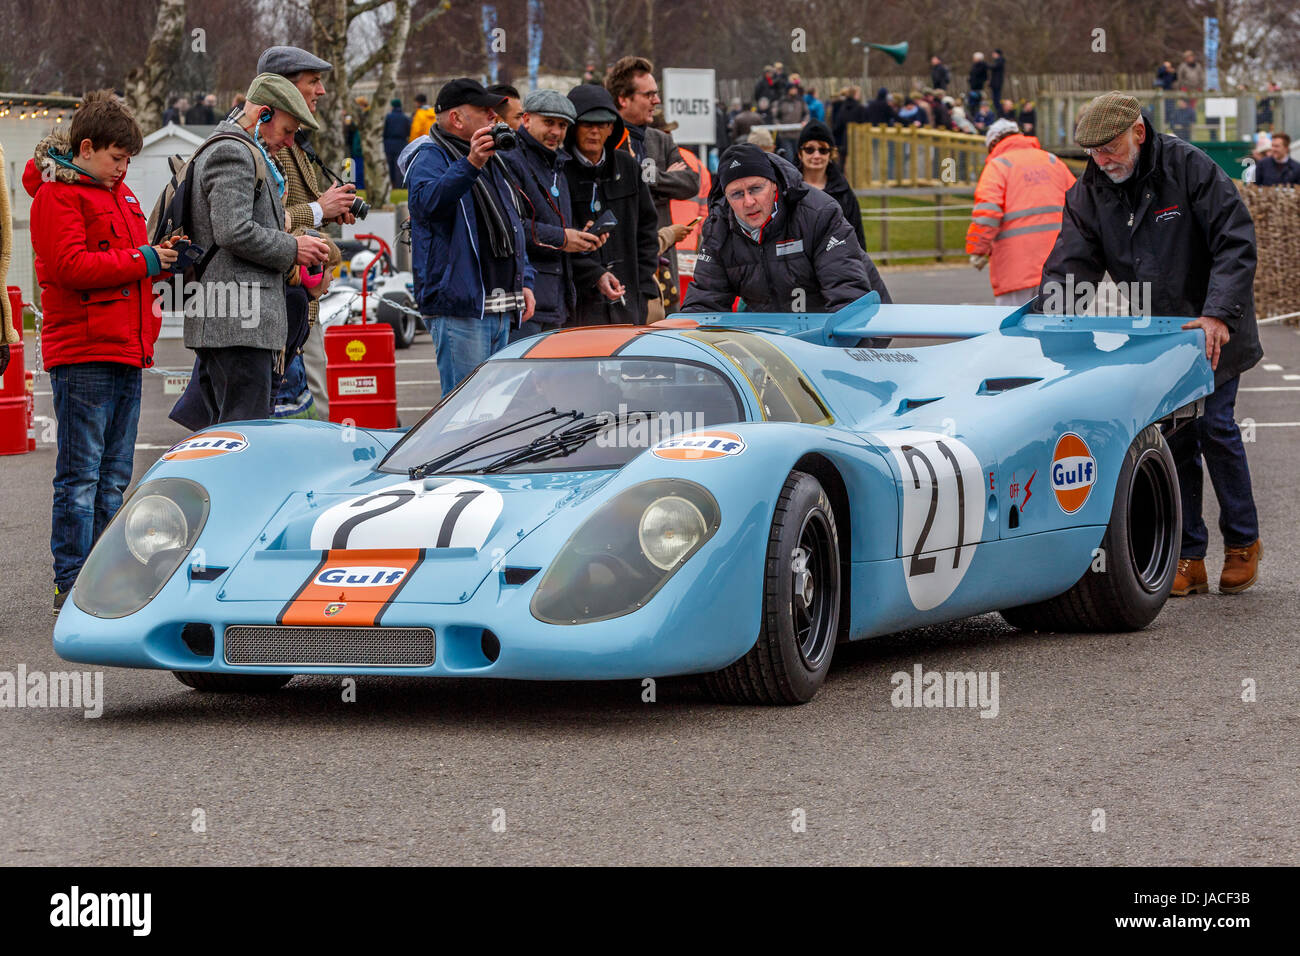 1970 Porsche 917K Group 5 car in the paddock at the Goodwood GRRC 74th Members Meeting, Sussex, UK. Stock Photo